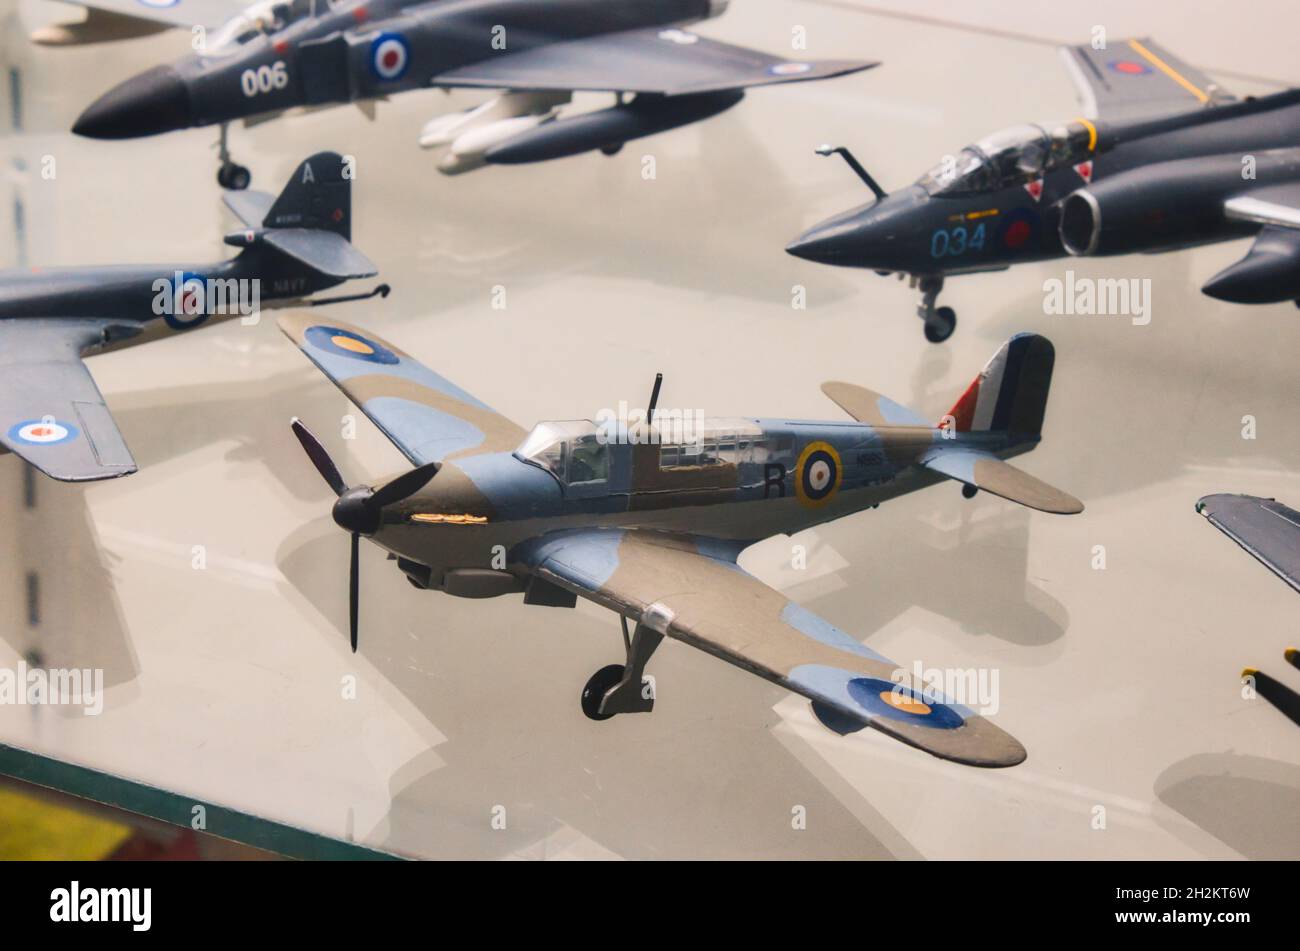 Plastic model military airplanes collection on a glass shelf Stock Photo